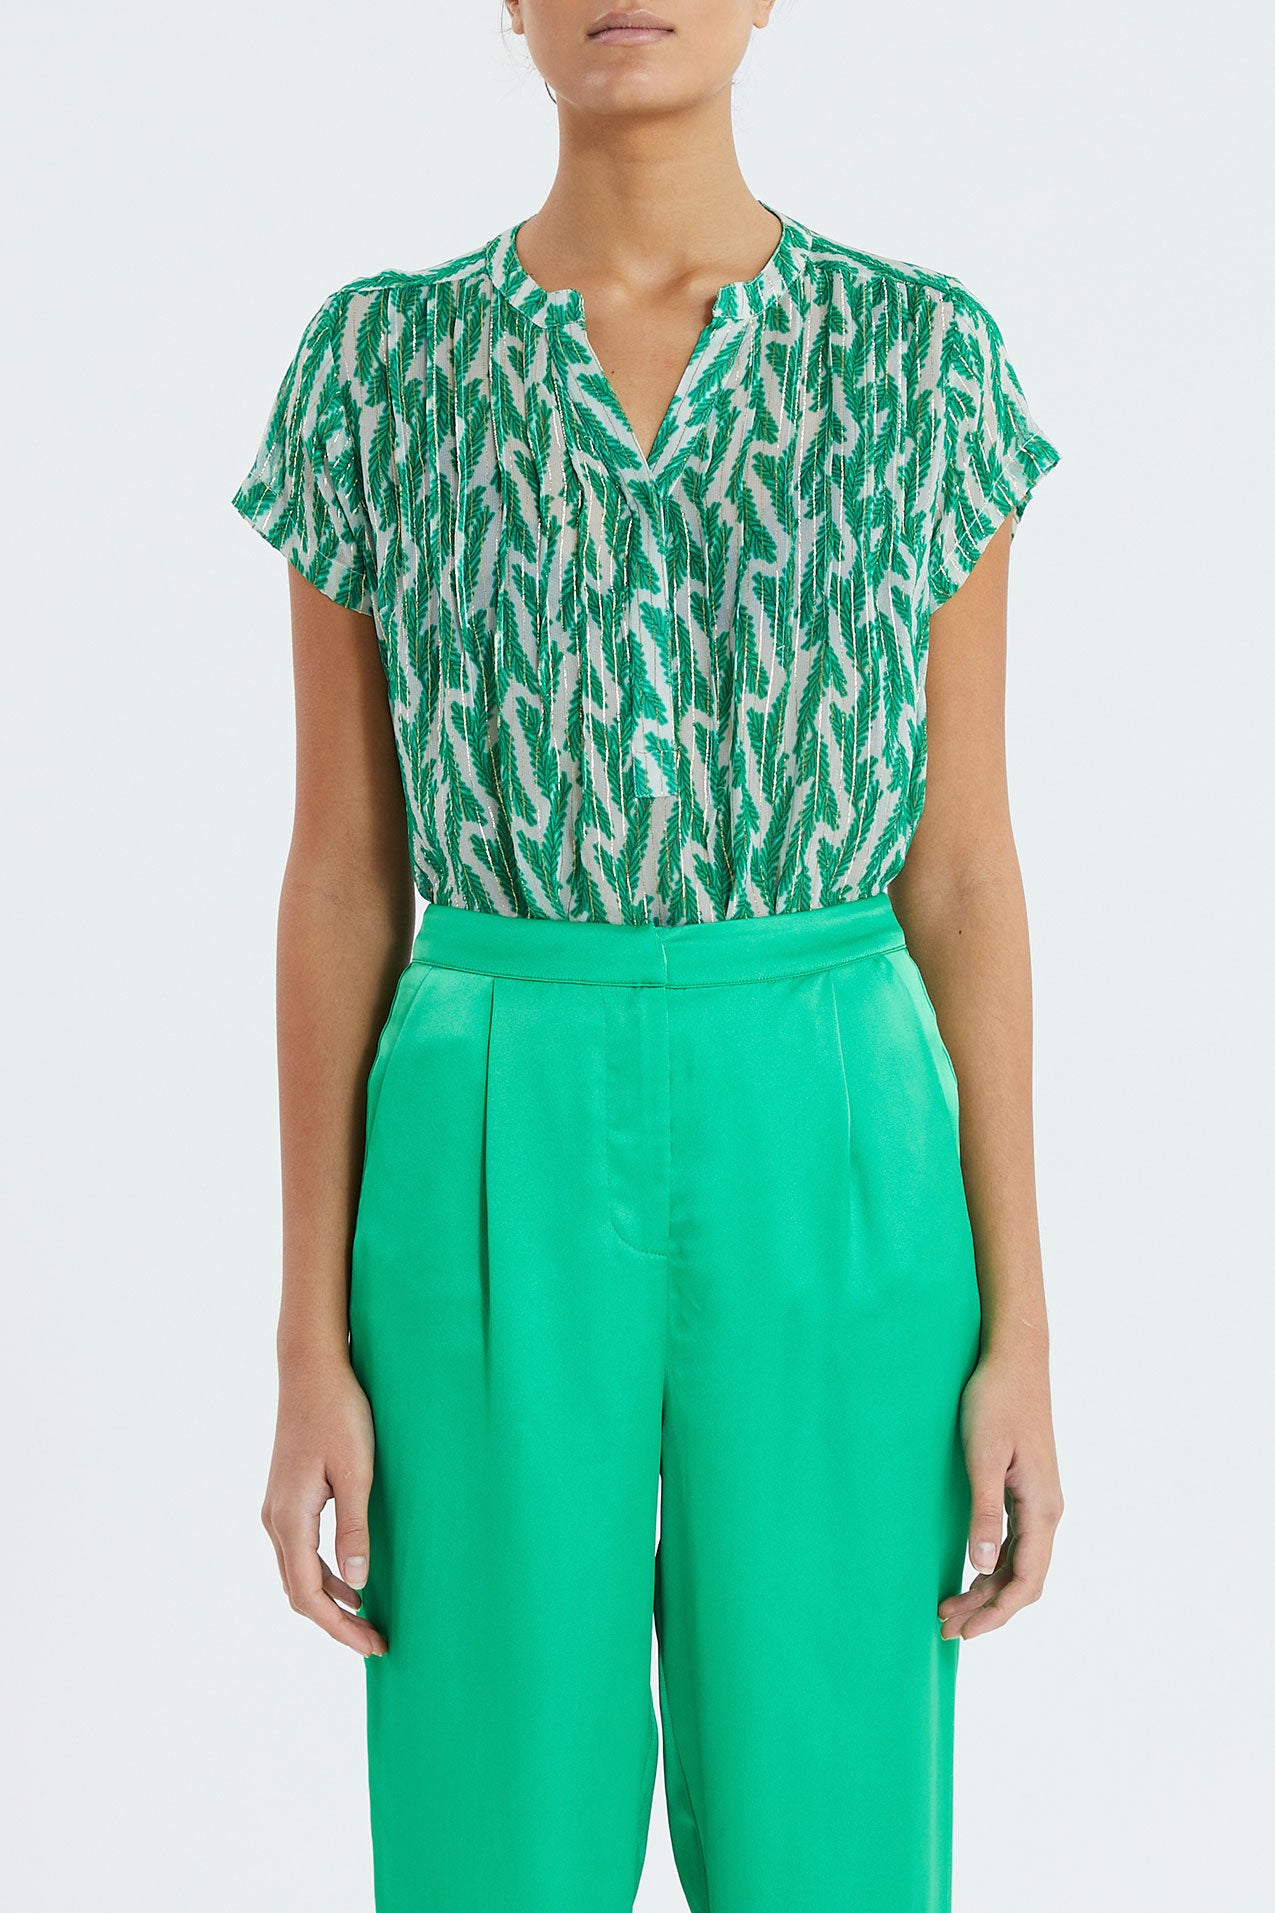 Lollys Laundry Heather Top Top 40 Green